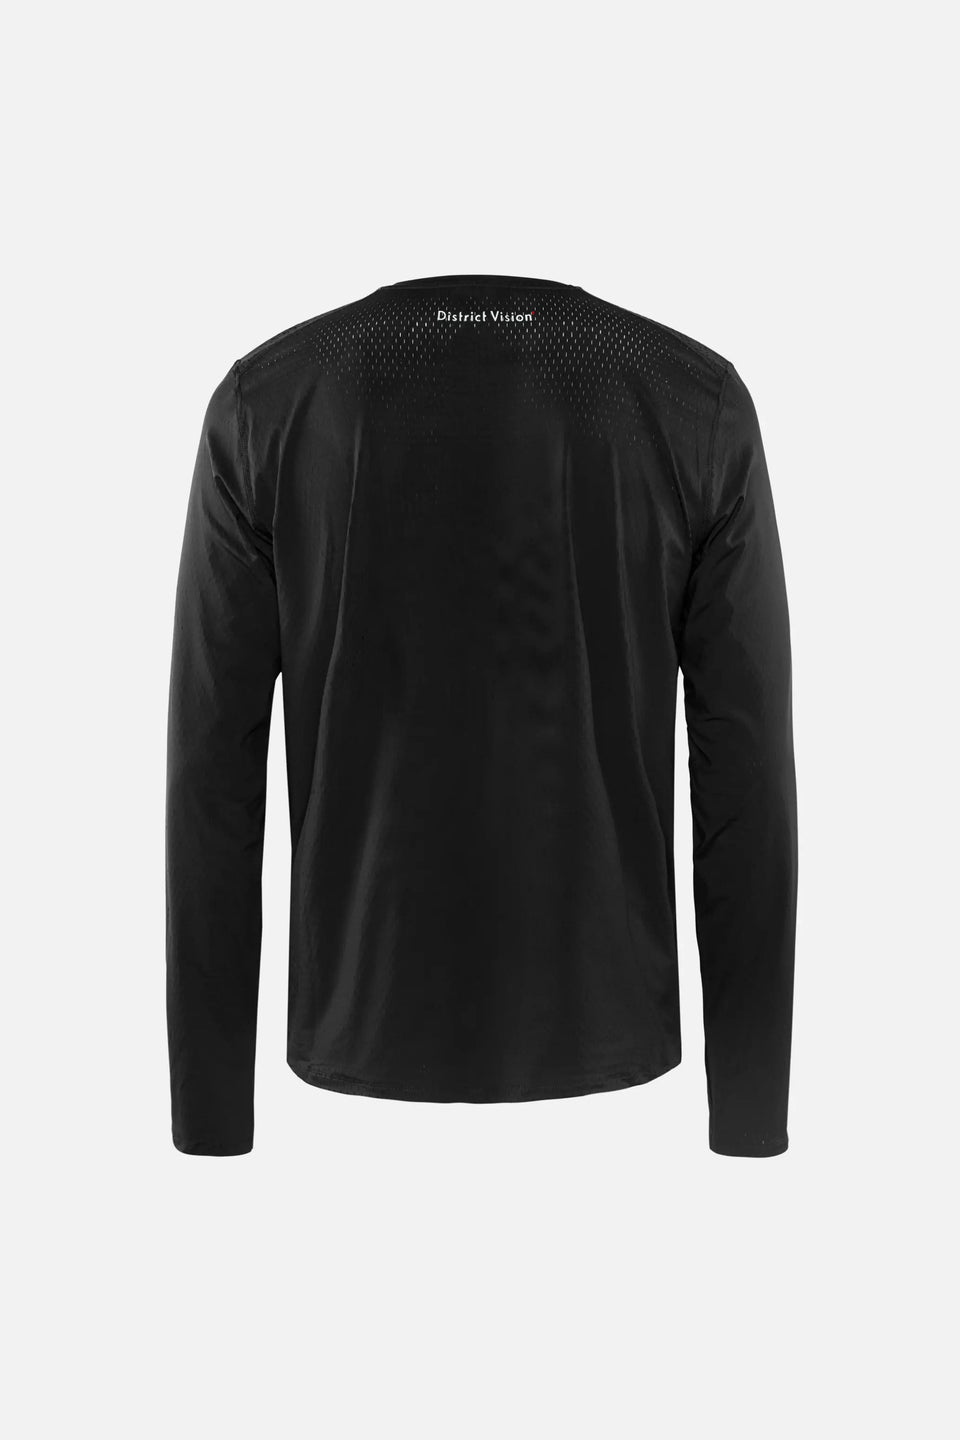 District Vision Los Angeles Running Air-Wear Long Sleeve T-Shirt Black Calculus Victoria BC Canada